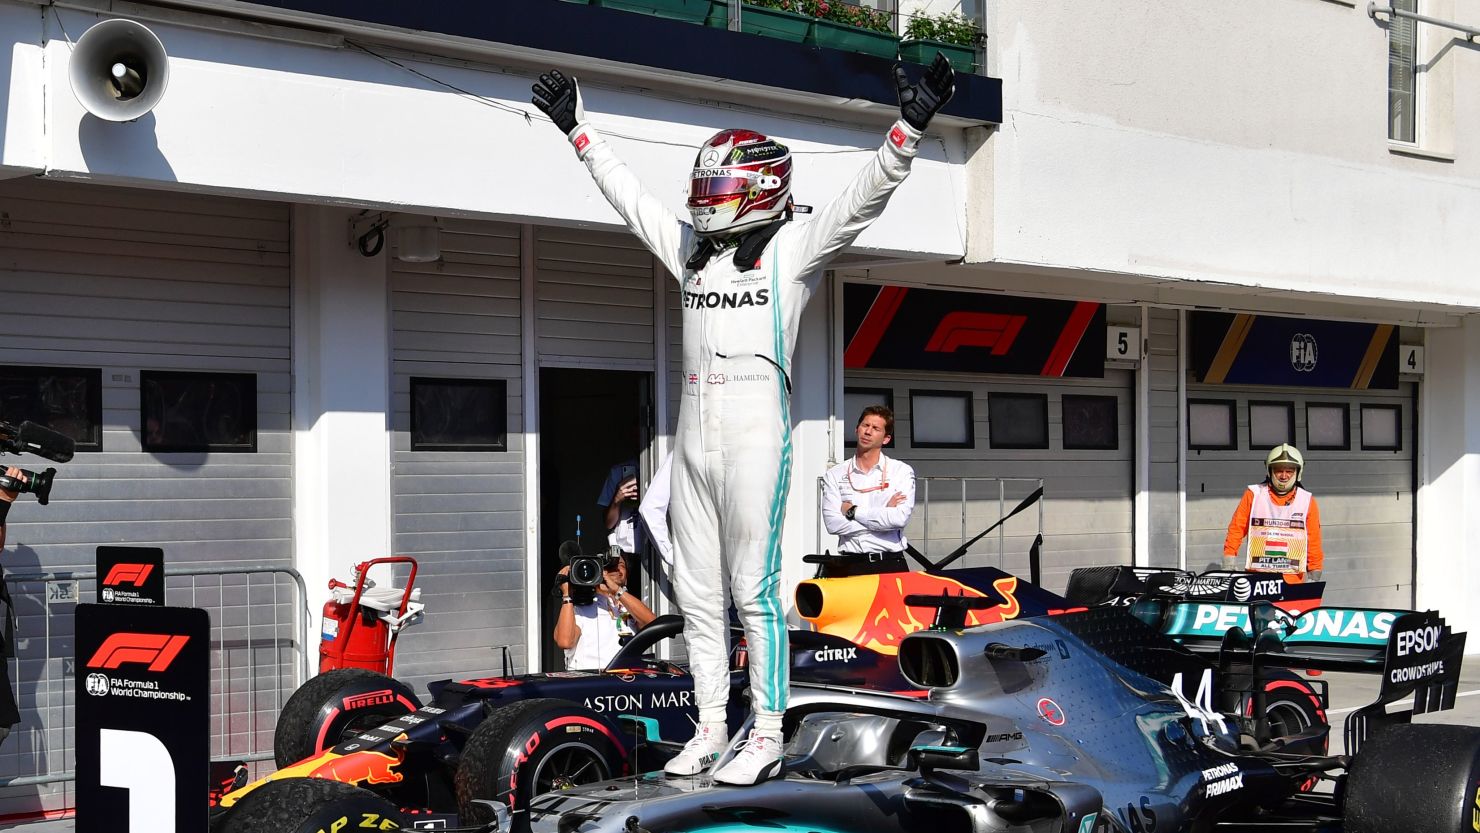 Lewis Hamilton celebrates his thrilling victory at the Hungarian Grand Prix.